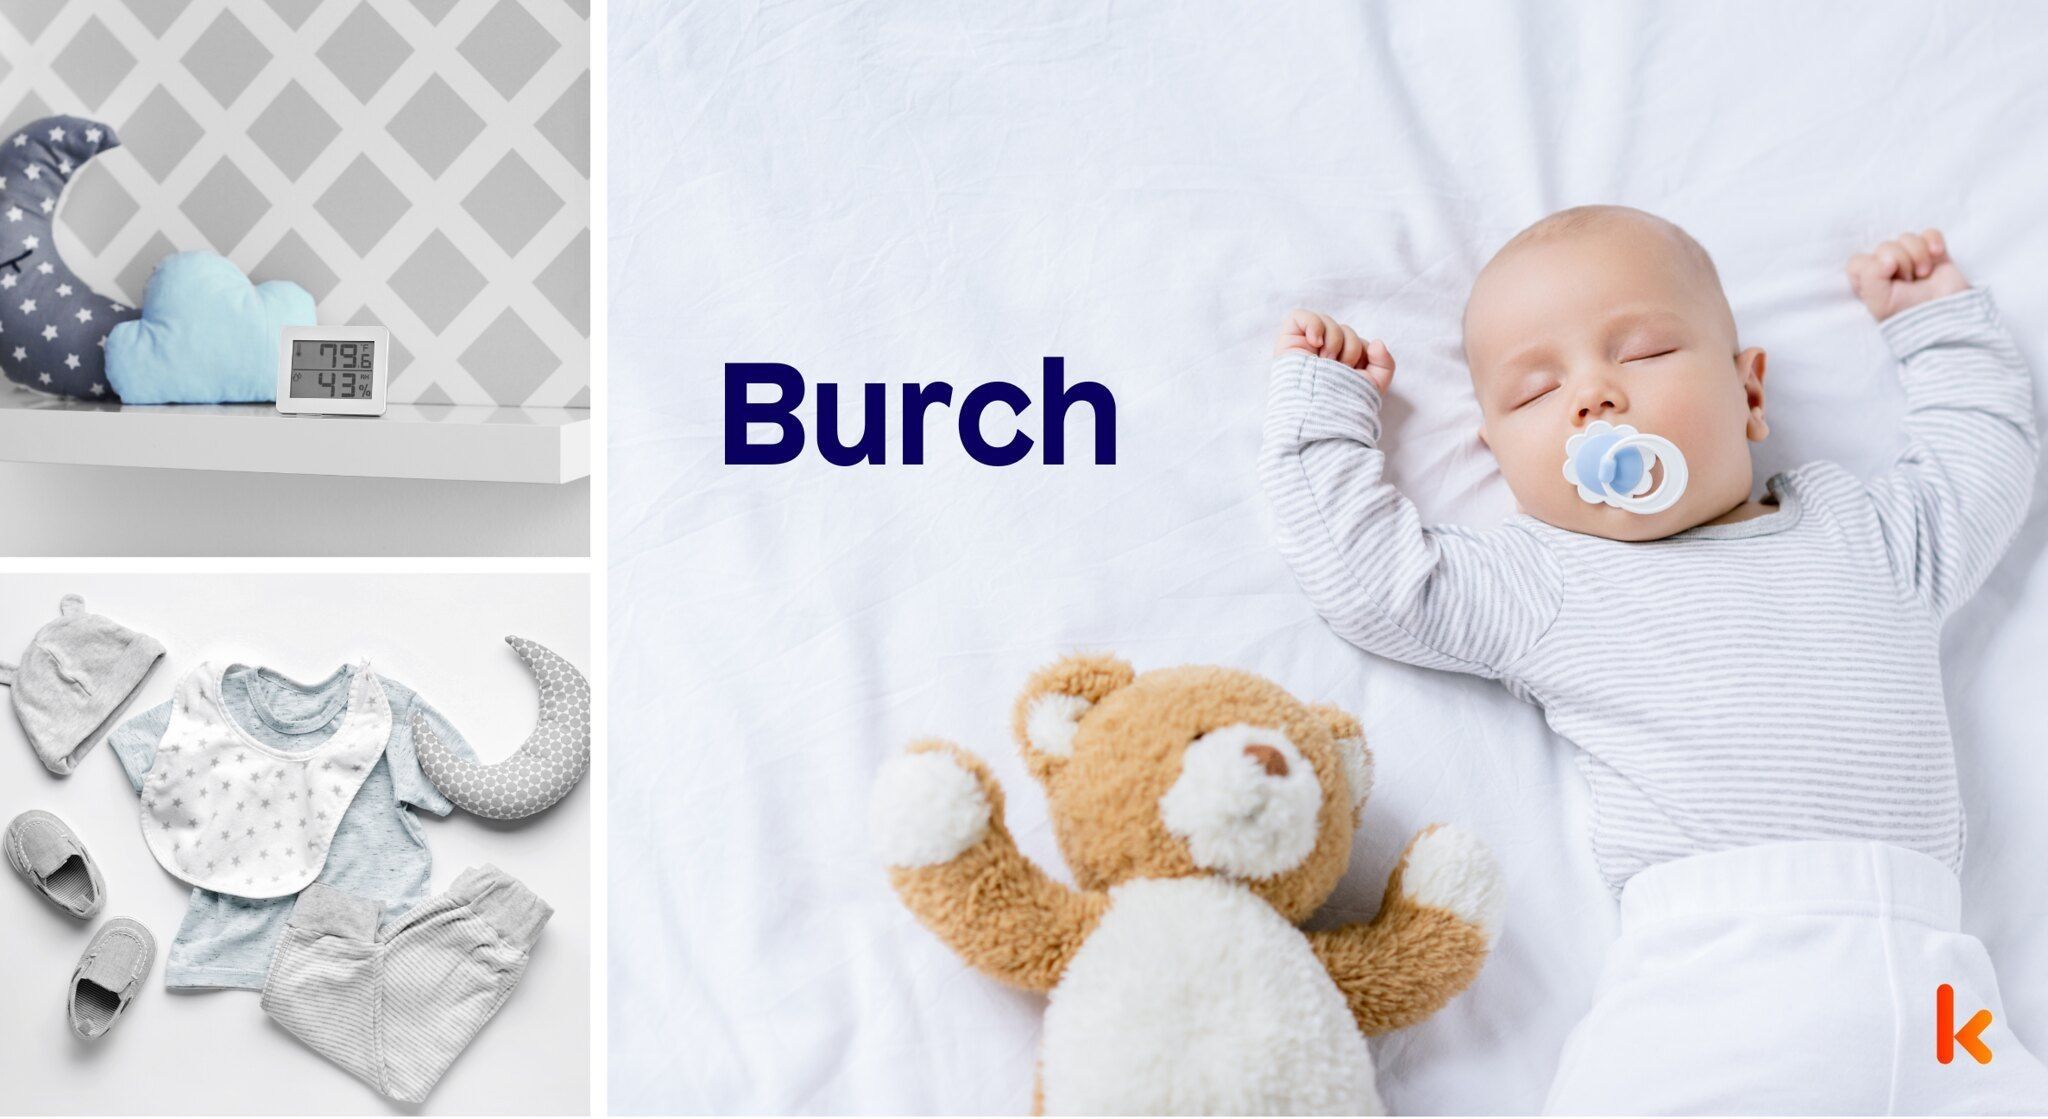 Meaning of the name Burch